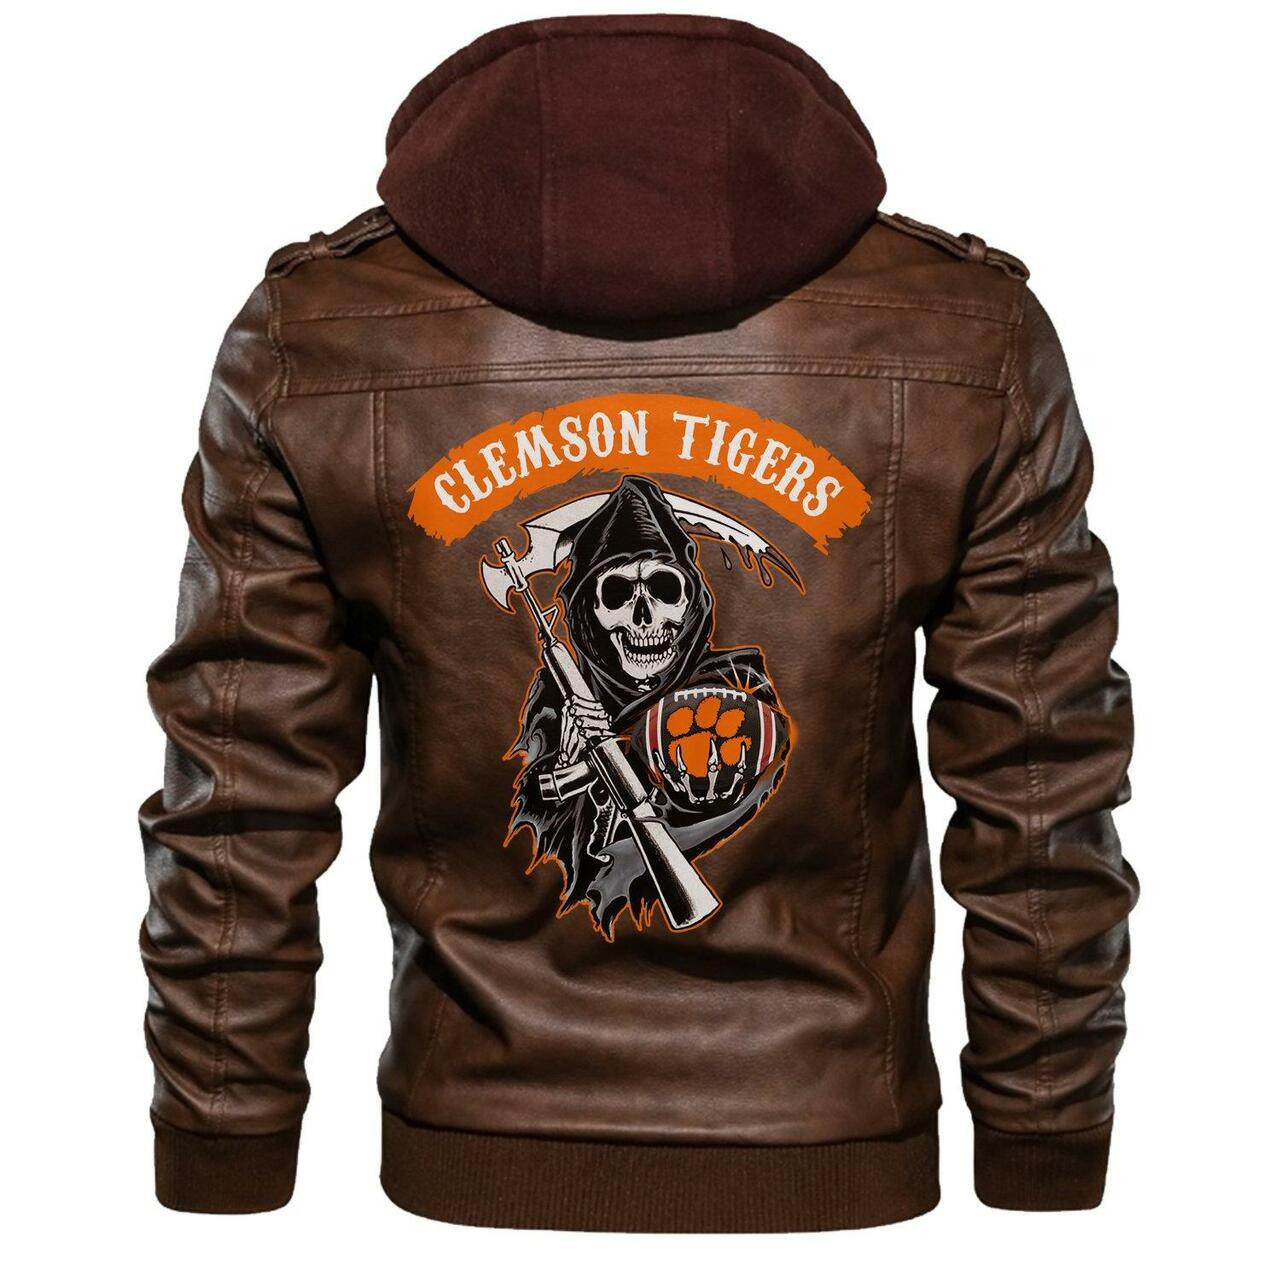 Check out and find the right leather jacket below 155